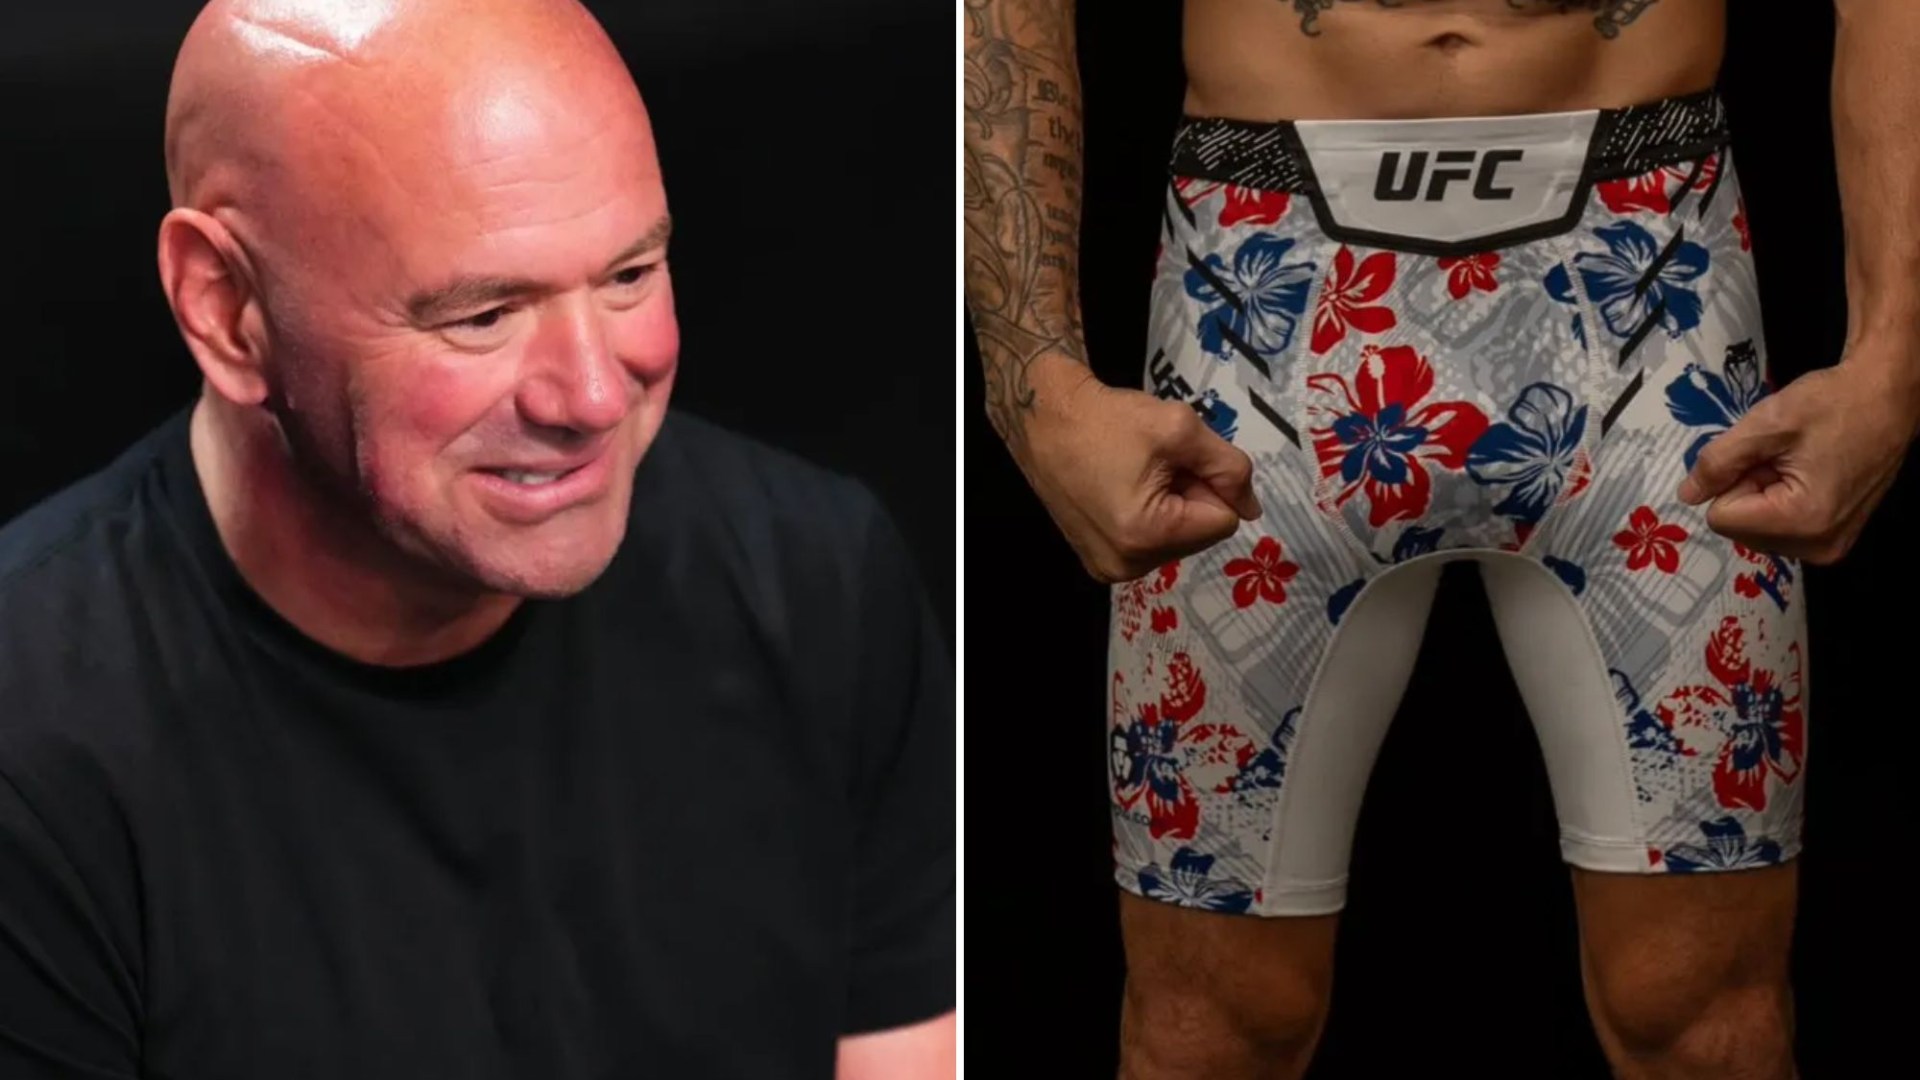 Dana White breaks major protocol for UFC 300 and gives into fighters’ long-running demand for custom fight shorts [Video]